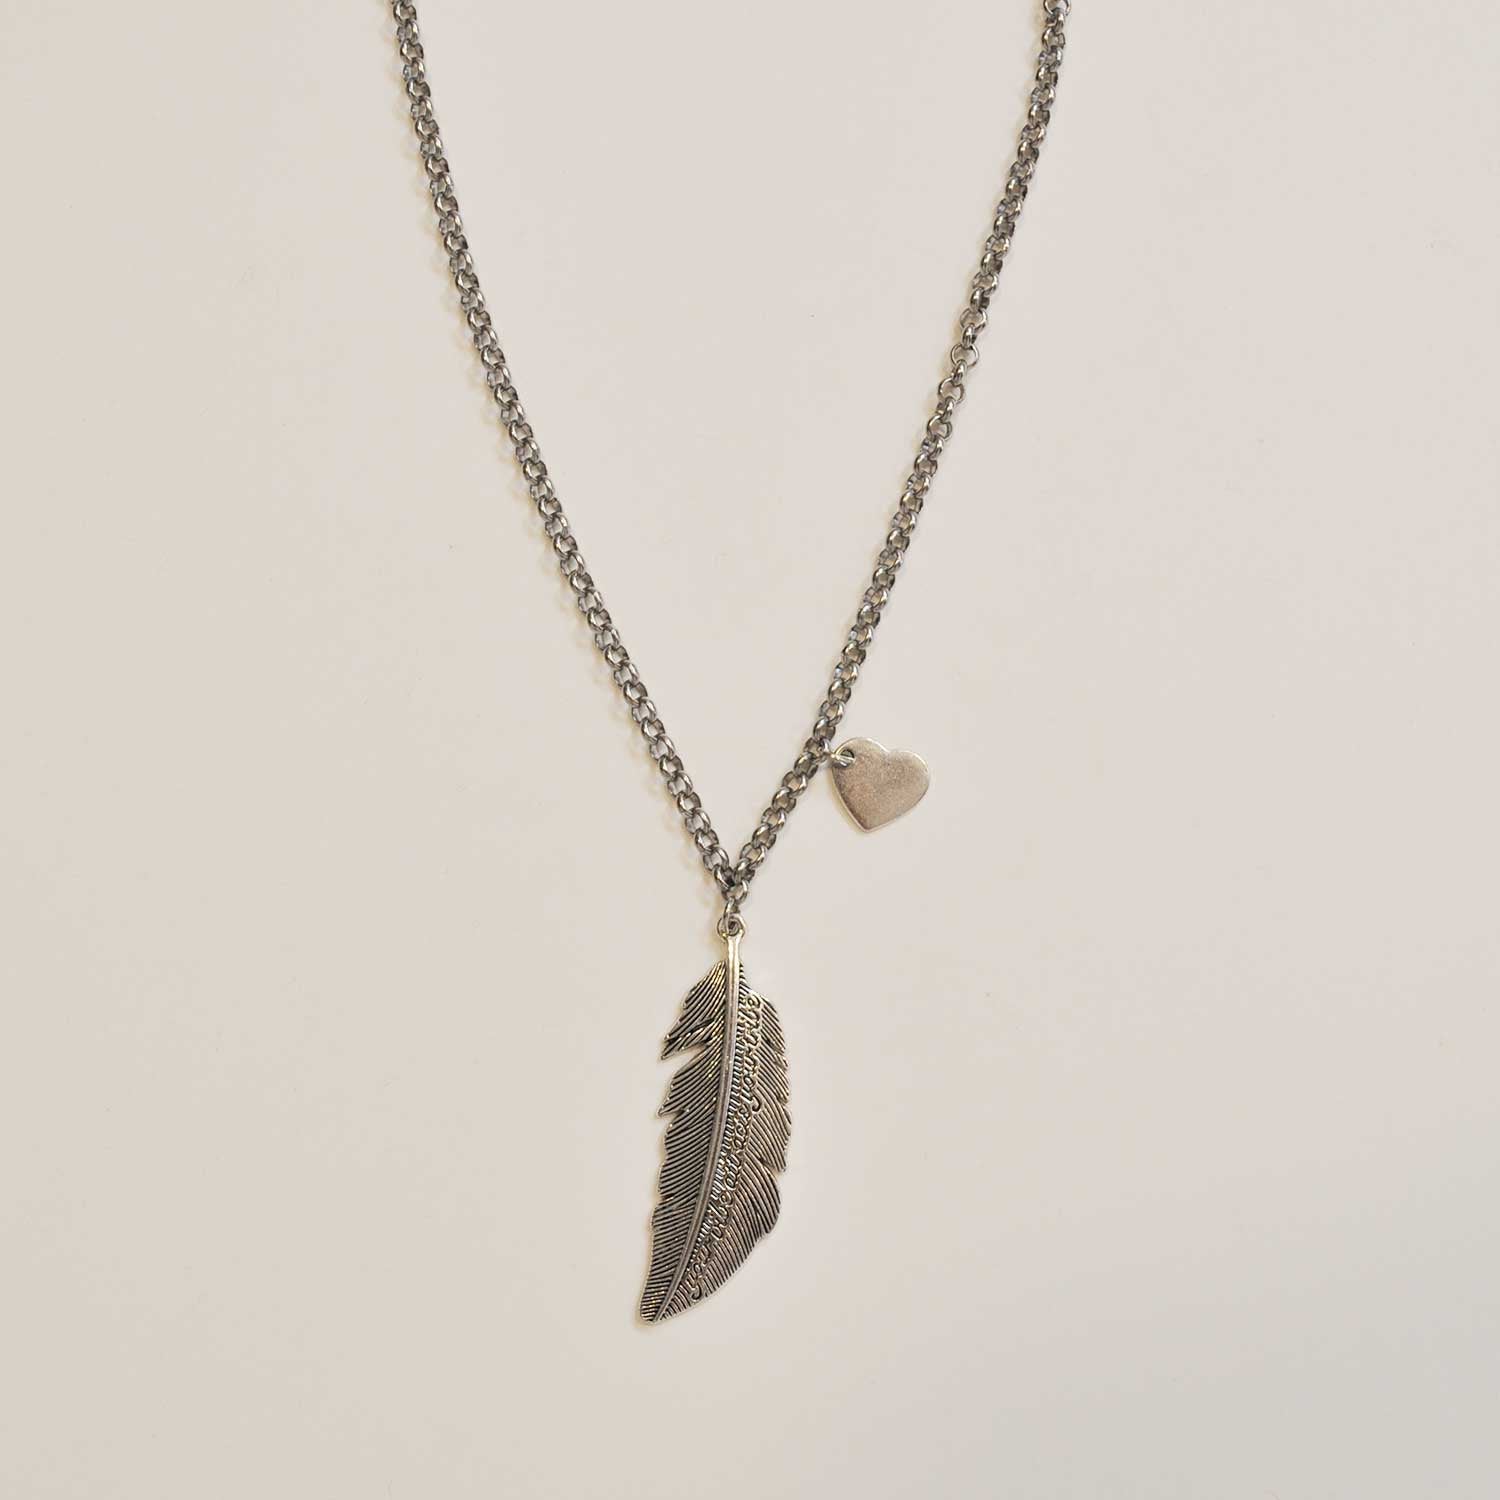 Feather and Heart Necklace